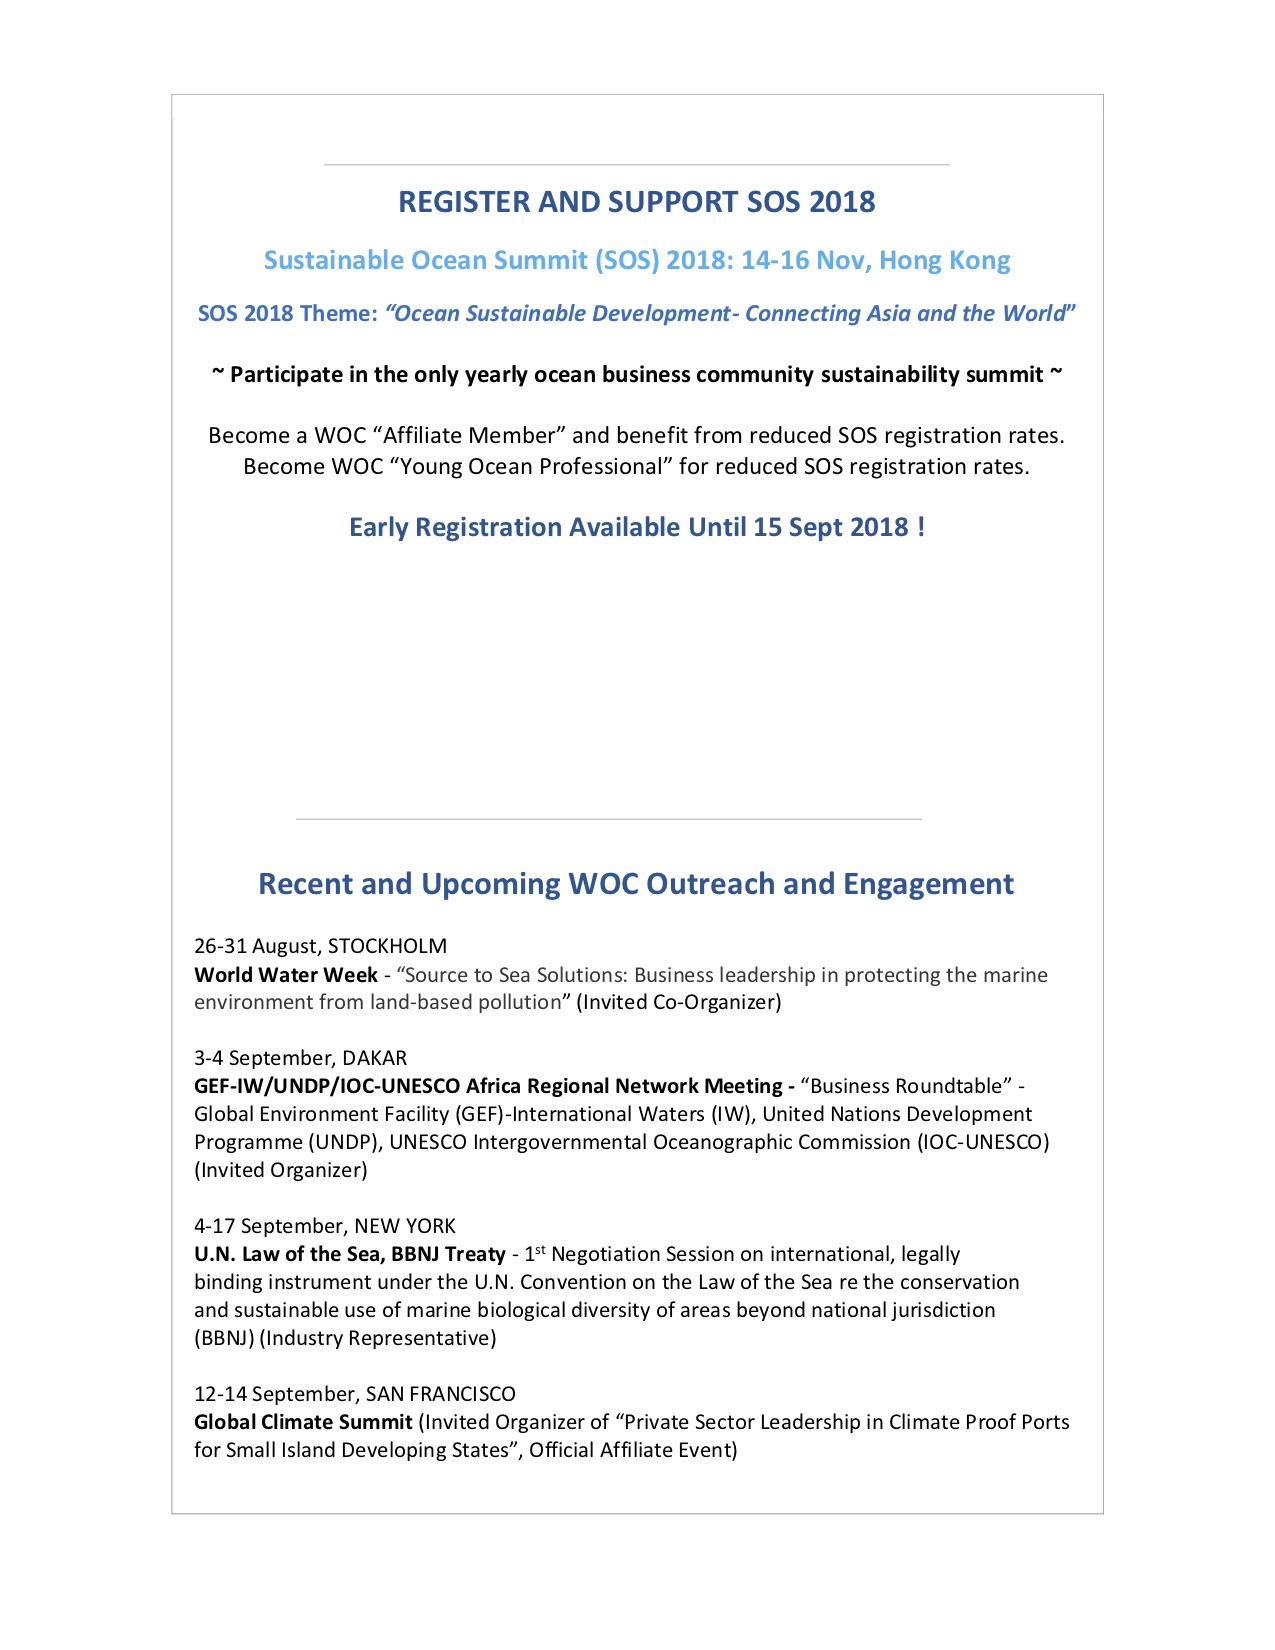 James Michel Foundation and Tian Sian Join WOC - 25 July 2018